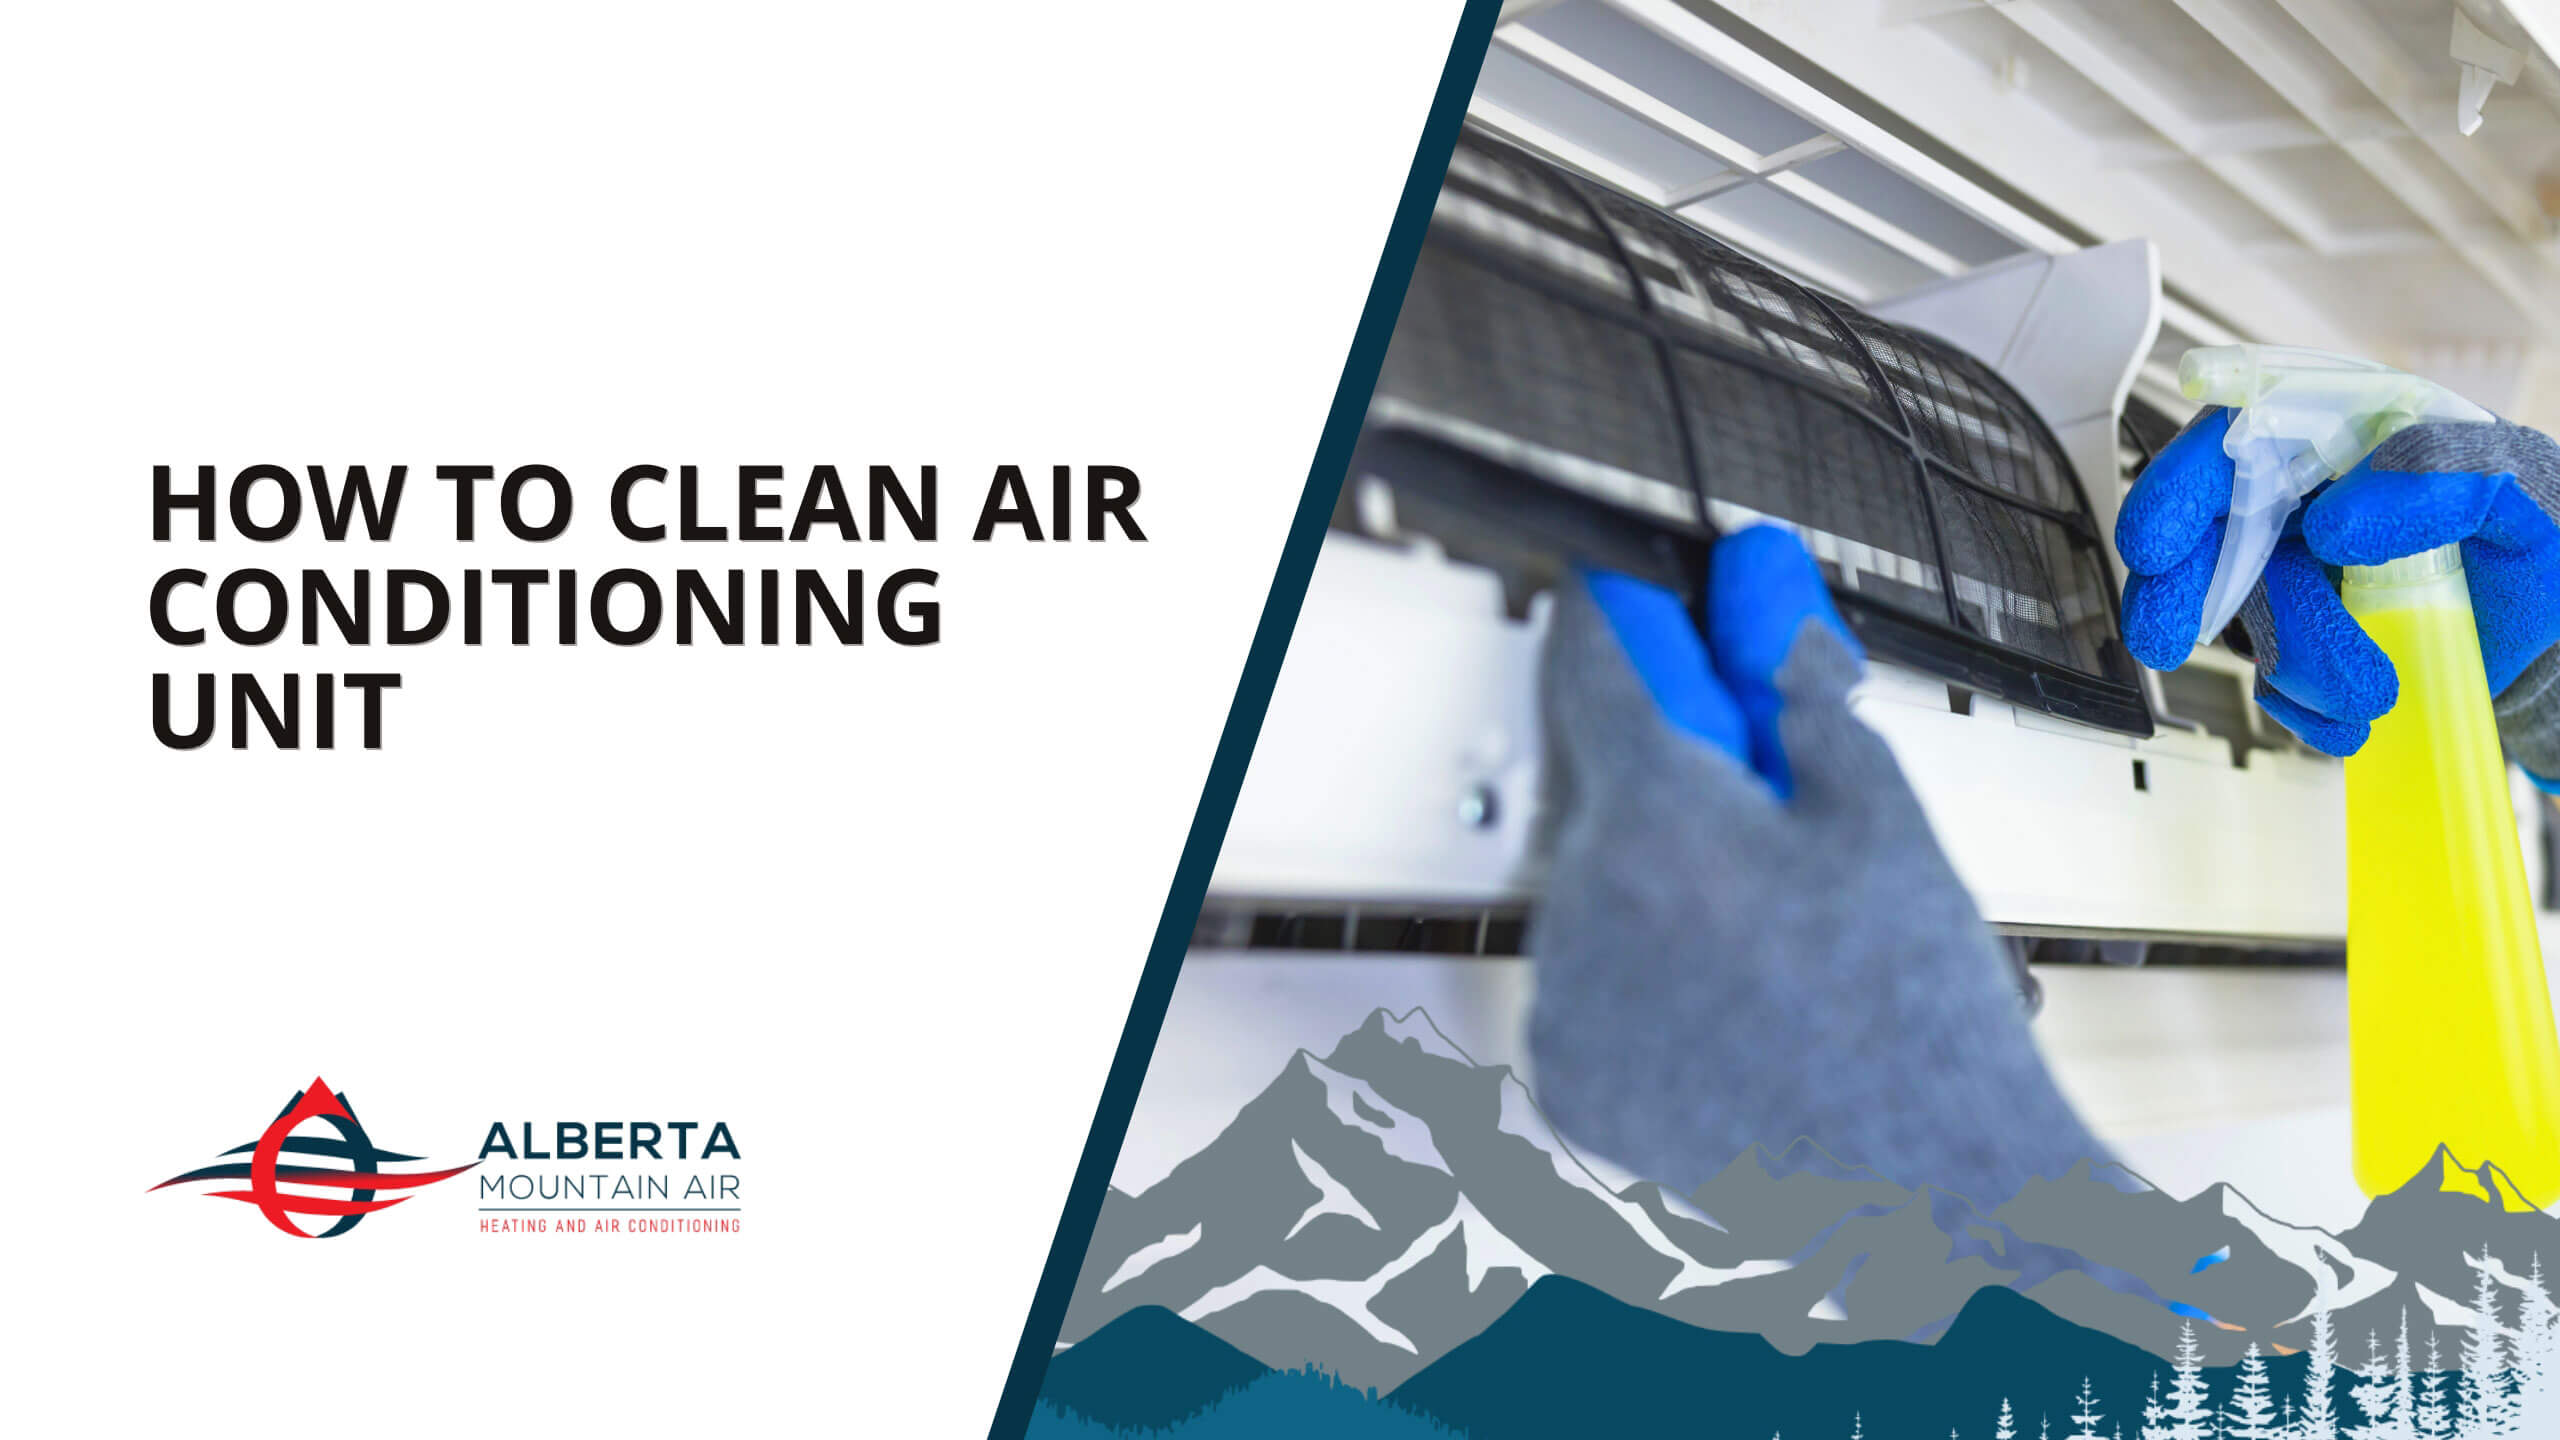 How to Clean Air Conditioning Unit